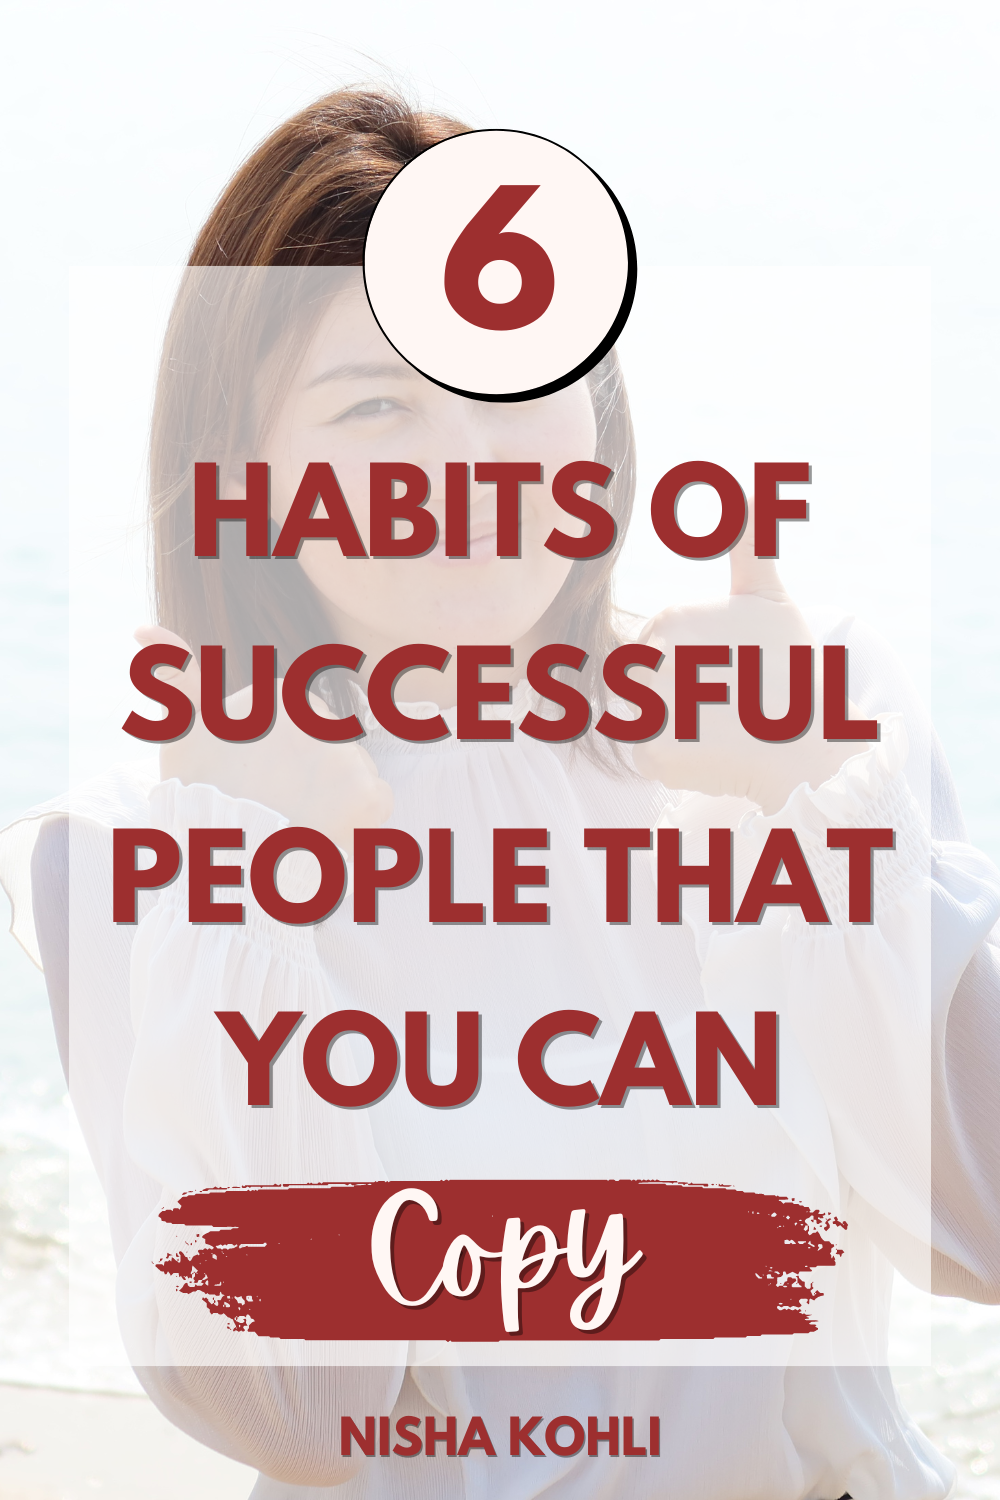 This pin is about 6 habits of successful people that you can copy